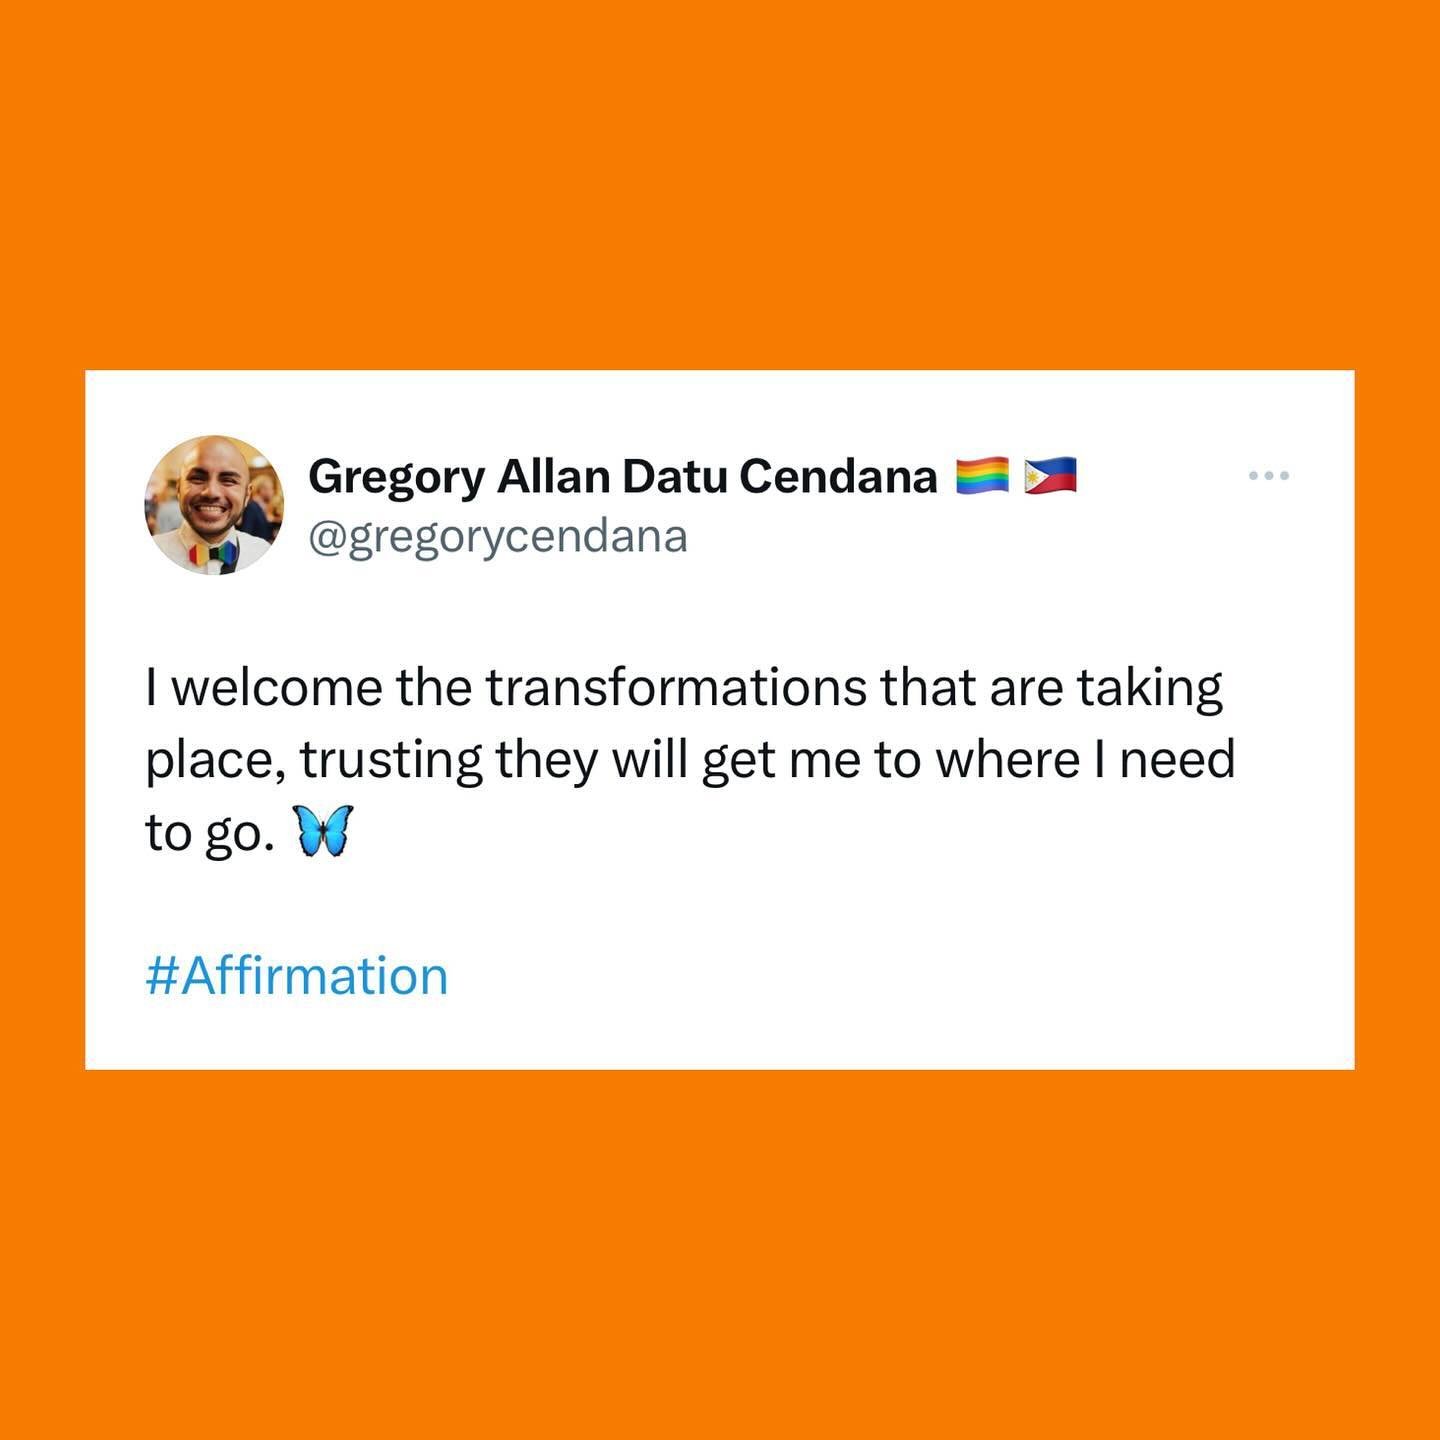 I welcome the transformations that are taking place, trusting they will get me to where I need to go. #Affirmation
&bull;
&bull;
&bull;
&bull;
&bull;
#igers #igdaily #instagood #instadaily #instalove #love #instalike #instagay #gay #p2 #bestoftheday 